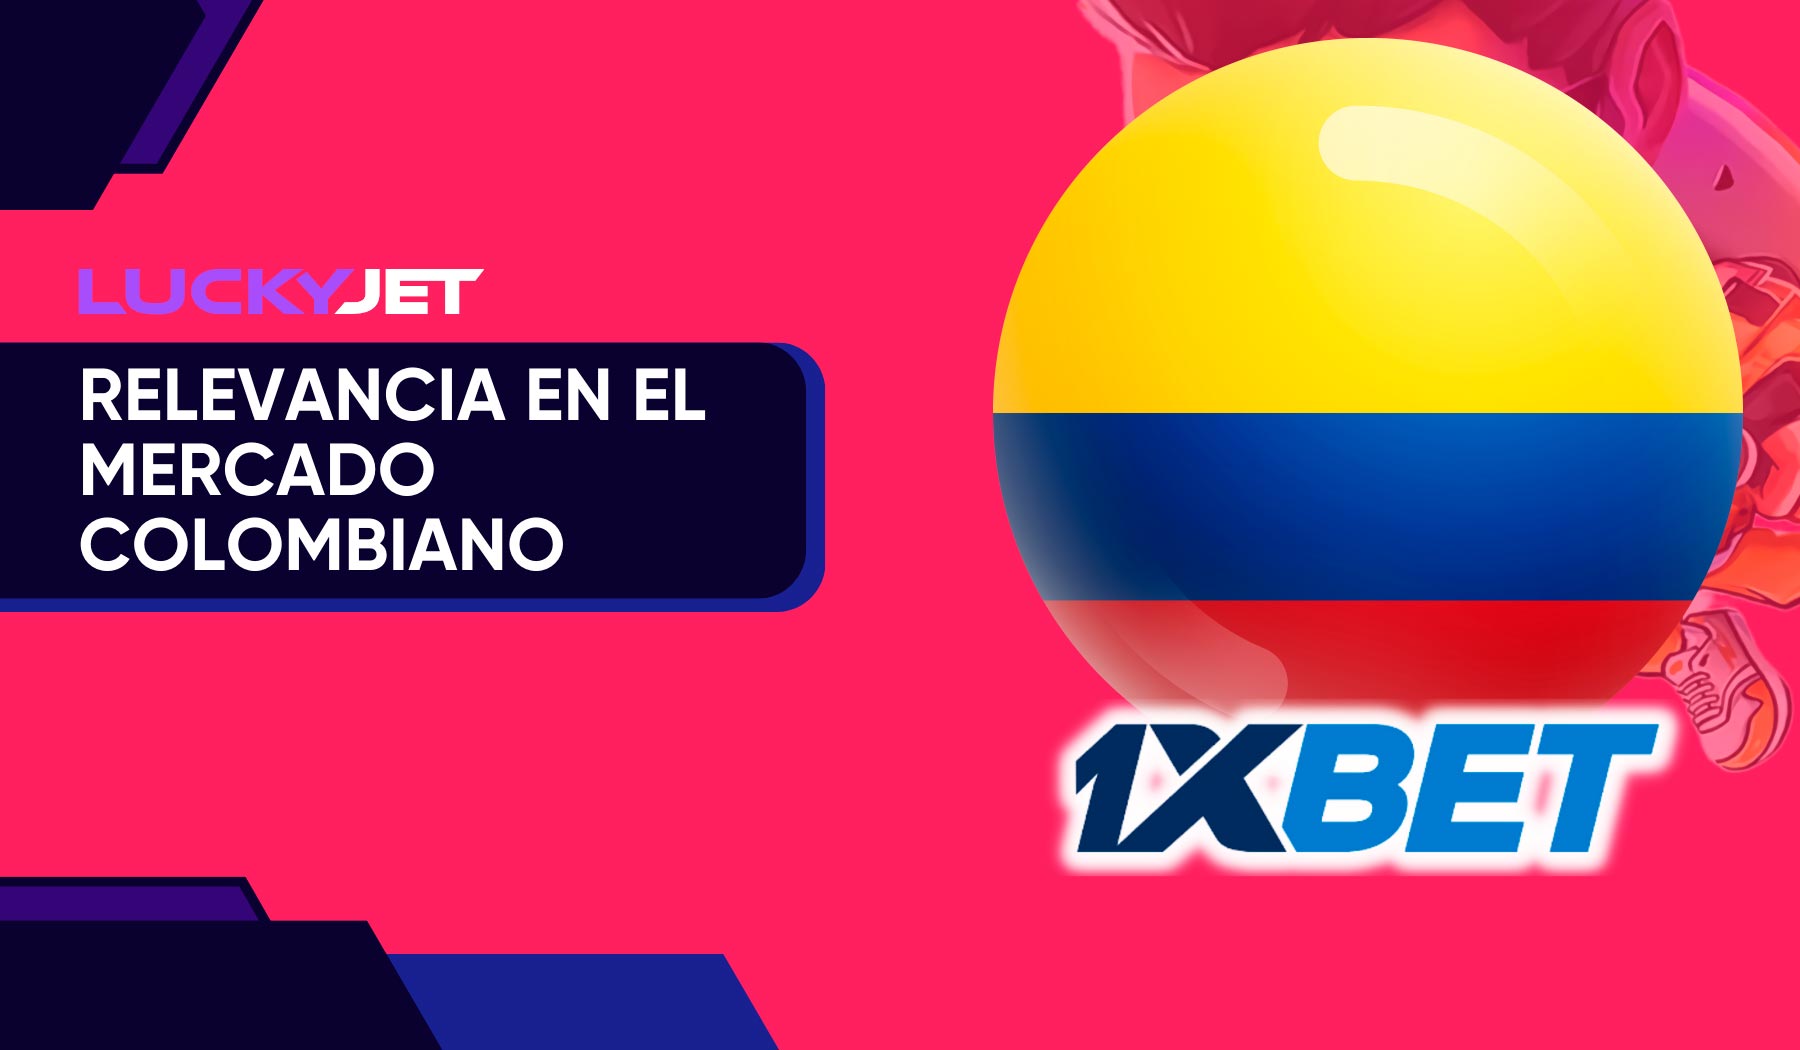 1xbet launched the Lucky Jet game specifically for the Colombian market